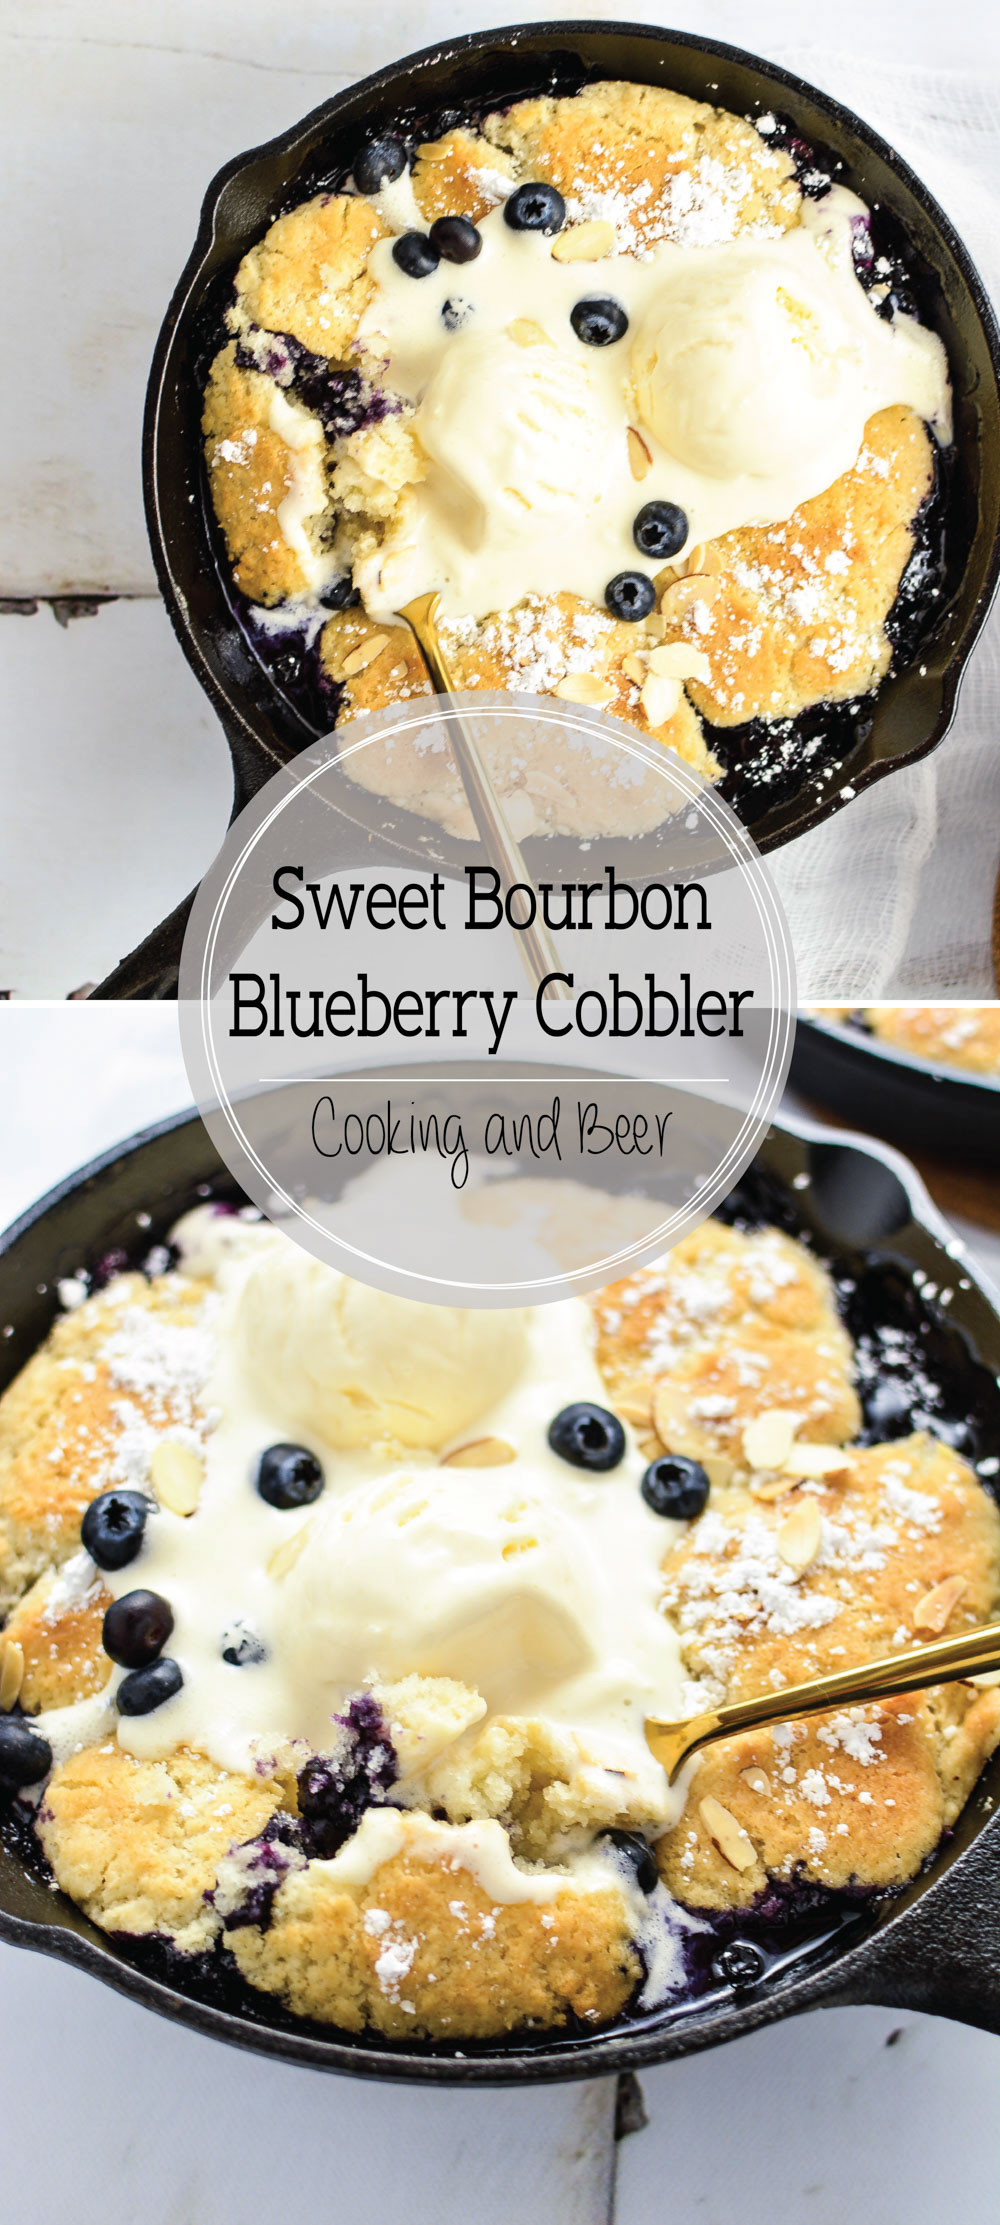 Sweet Bourbon Blueberry Cobbler is a must-have dessert recipe for the summertime that has a hint of bourbon sweetness and a burst of blueberry tartness!